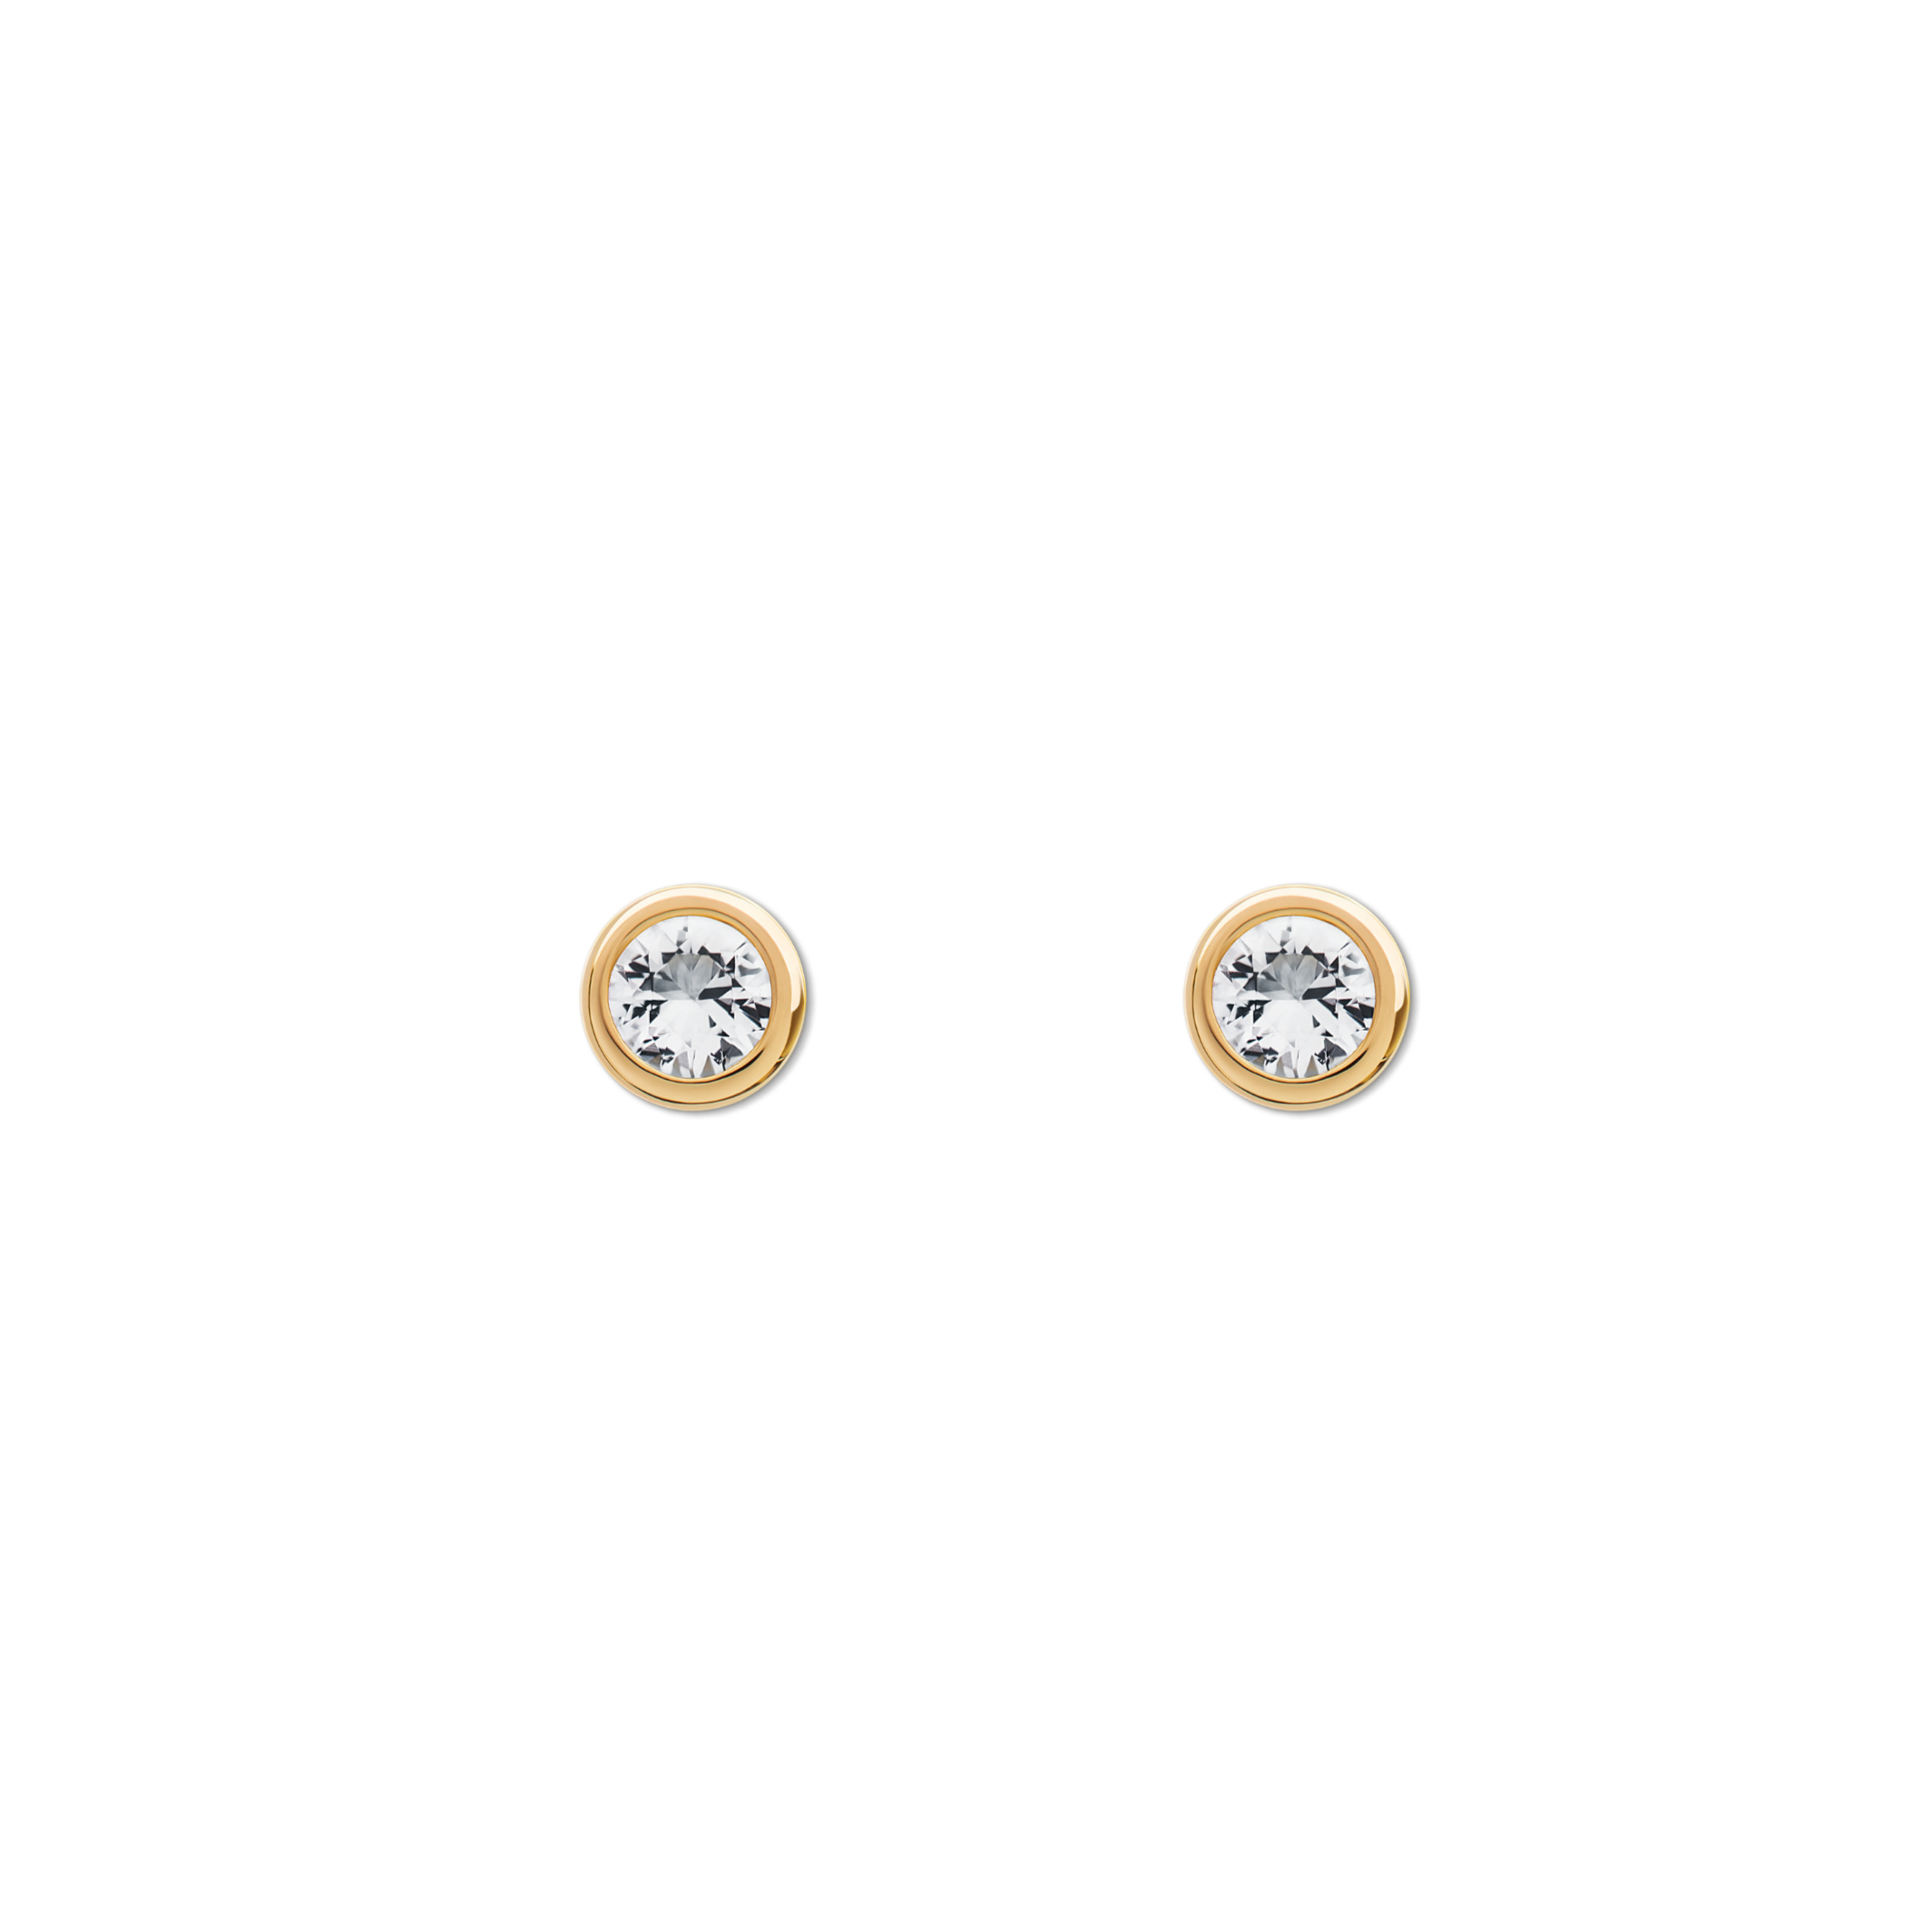 18k Gold Vermeil Stud Earrings, adorned with dazzling Topaz stones